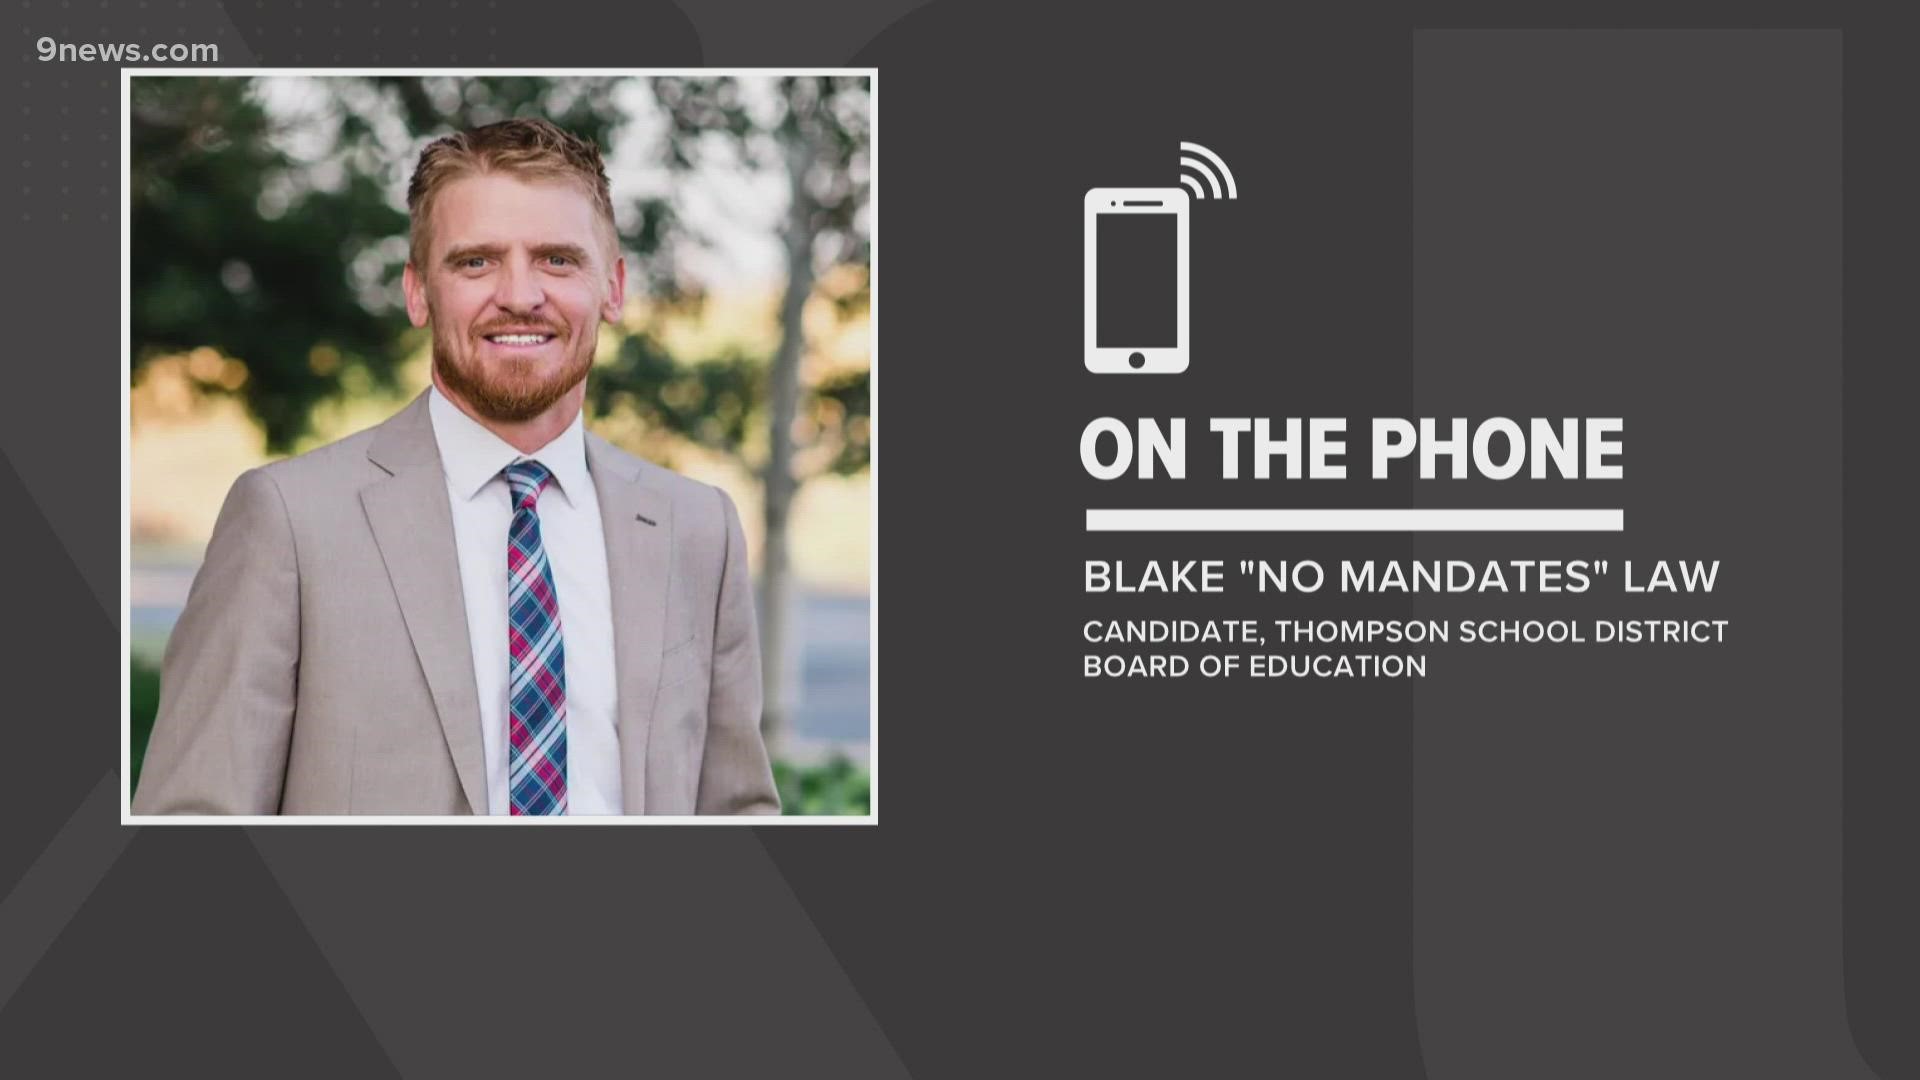 Voters deciding the Thompson School District board director race can choose between Alexandra Lessem and Blake “No Mandates” Law. Colorado law allows for nicknames.